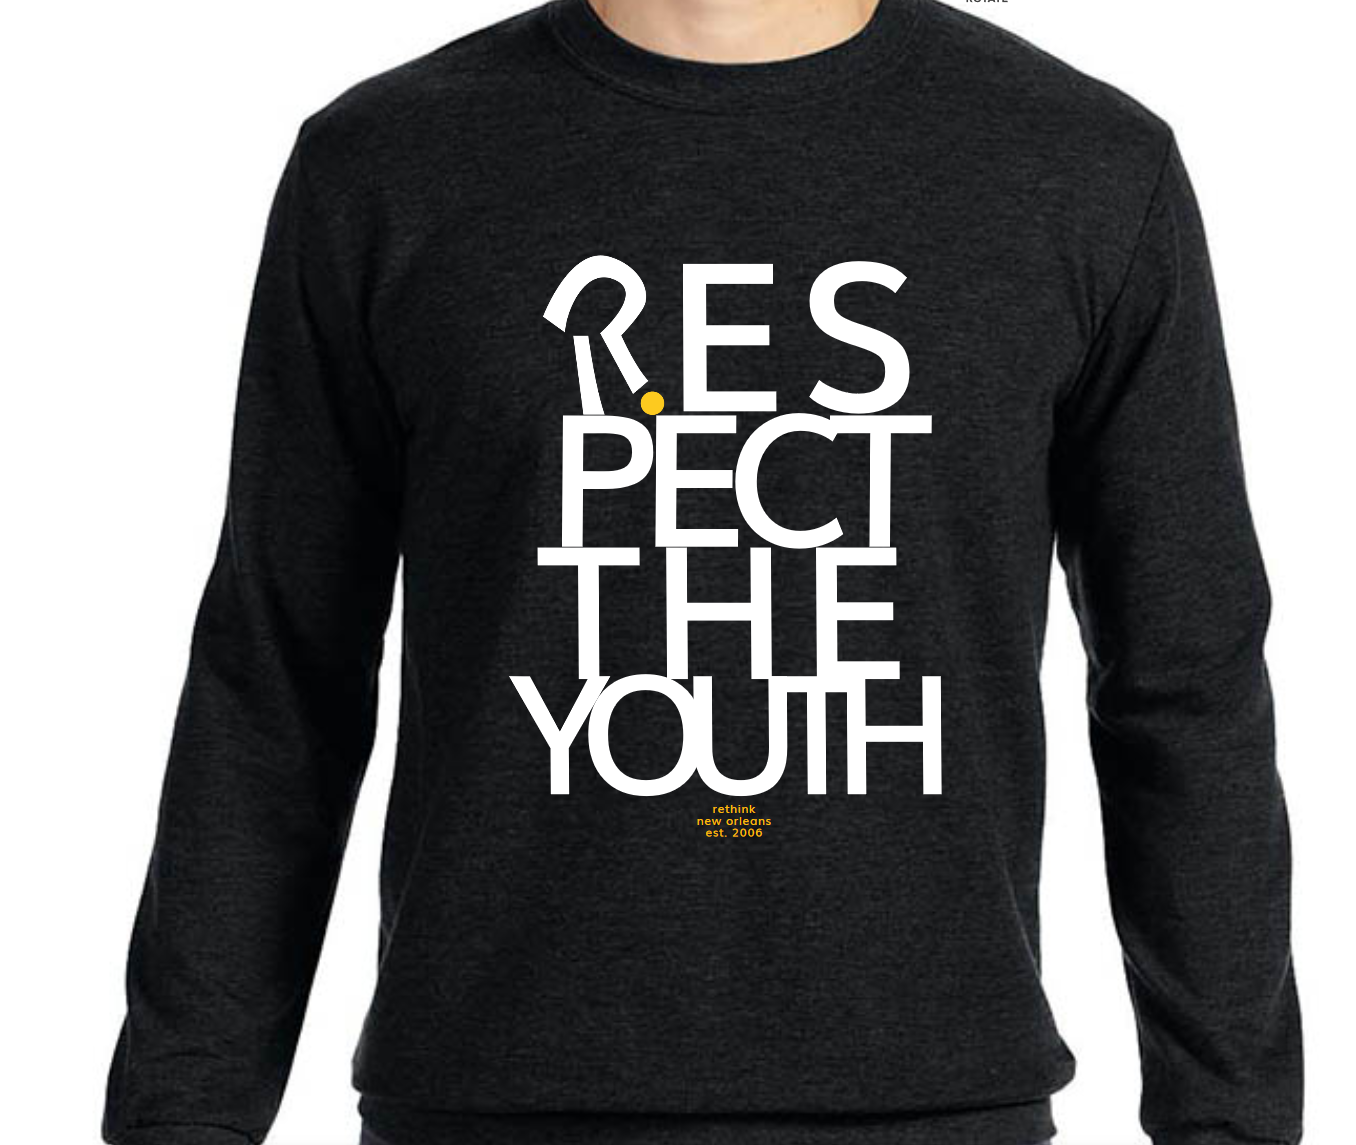 respect the youth crew neck